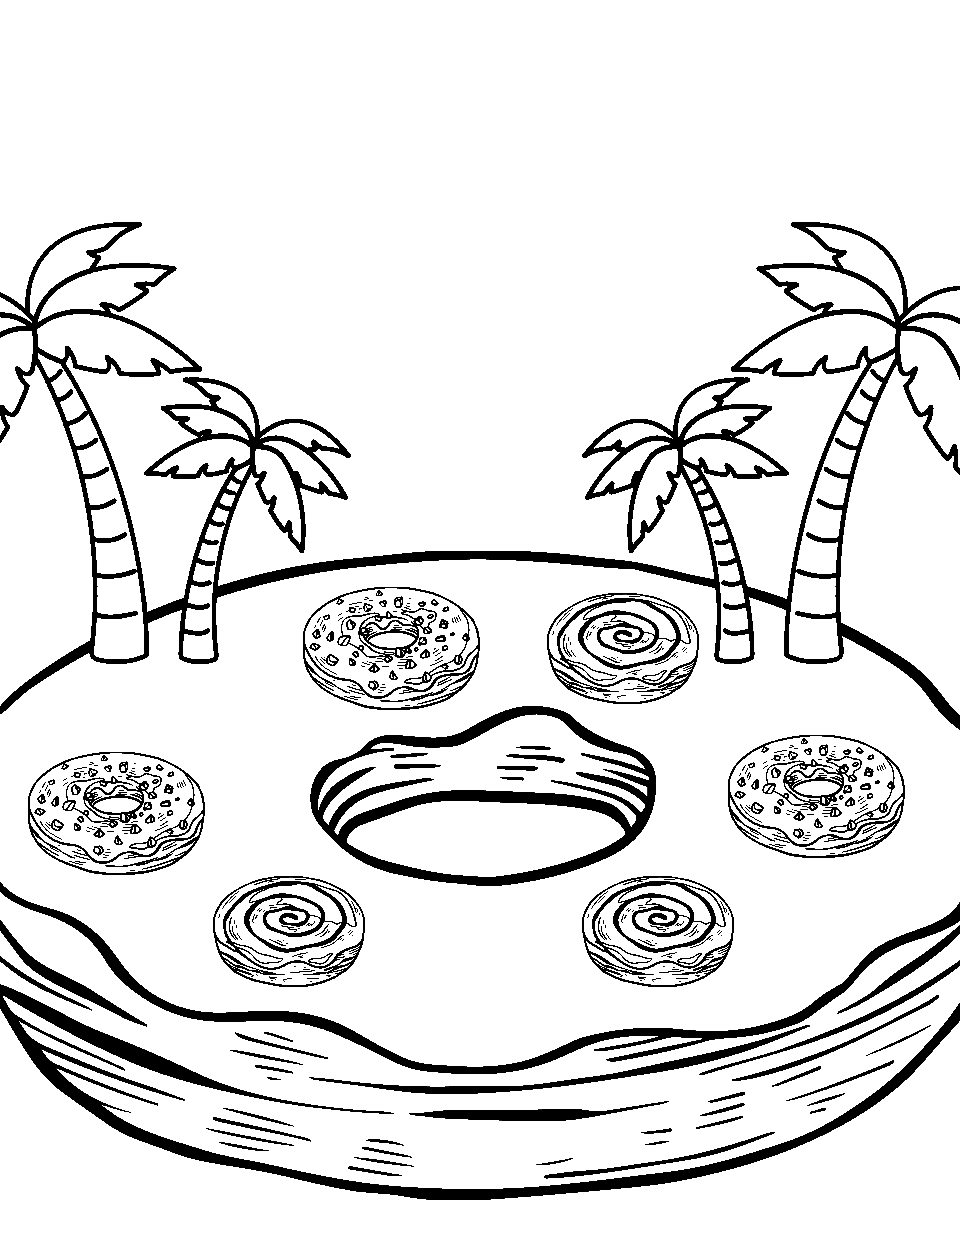 Mystery Donut Island Coloring Page - An island paradise with palm trees and donuts.